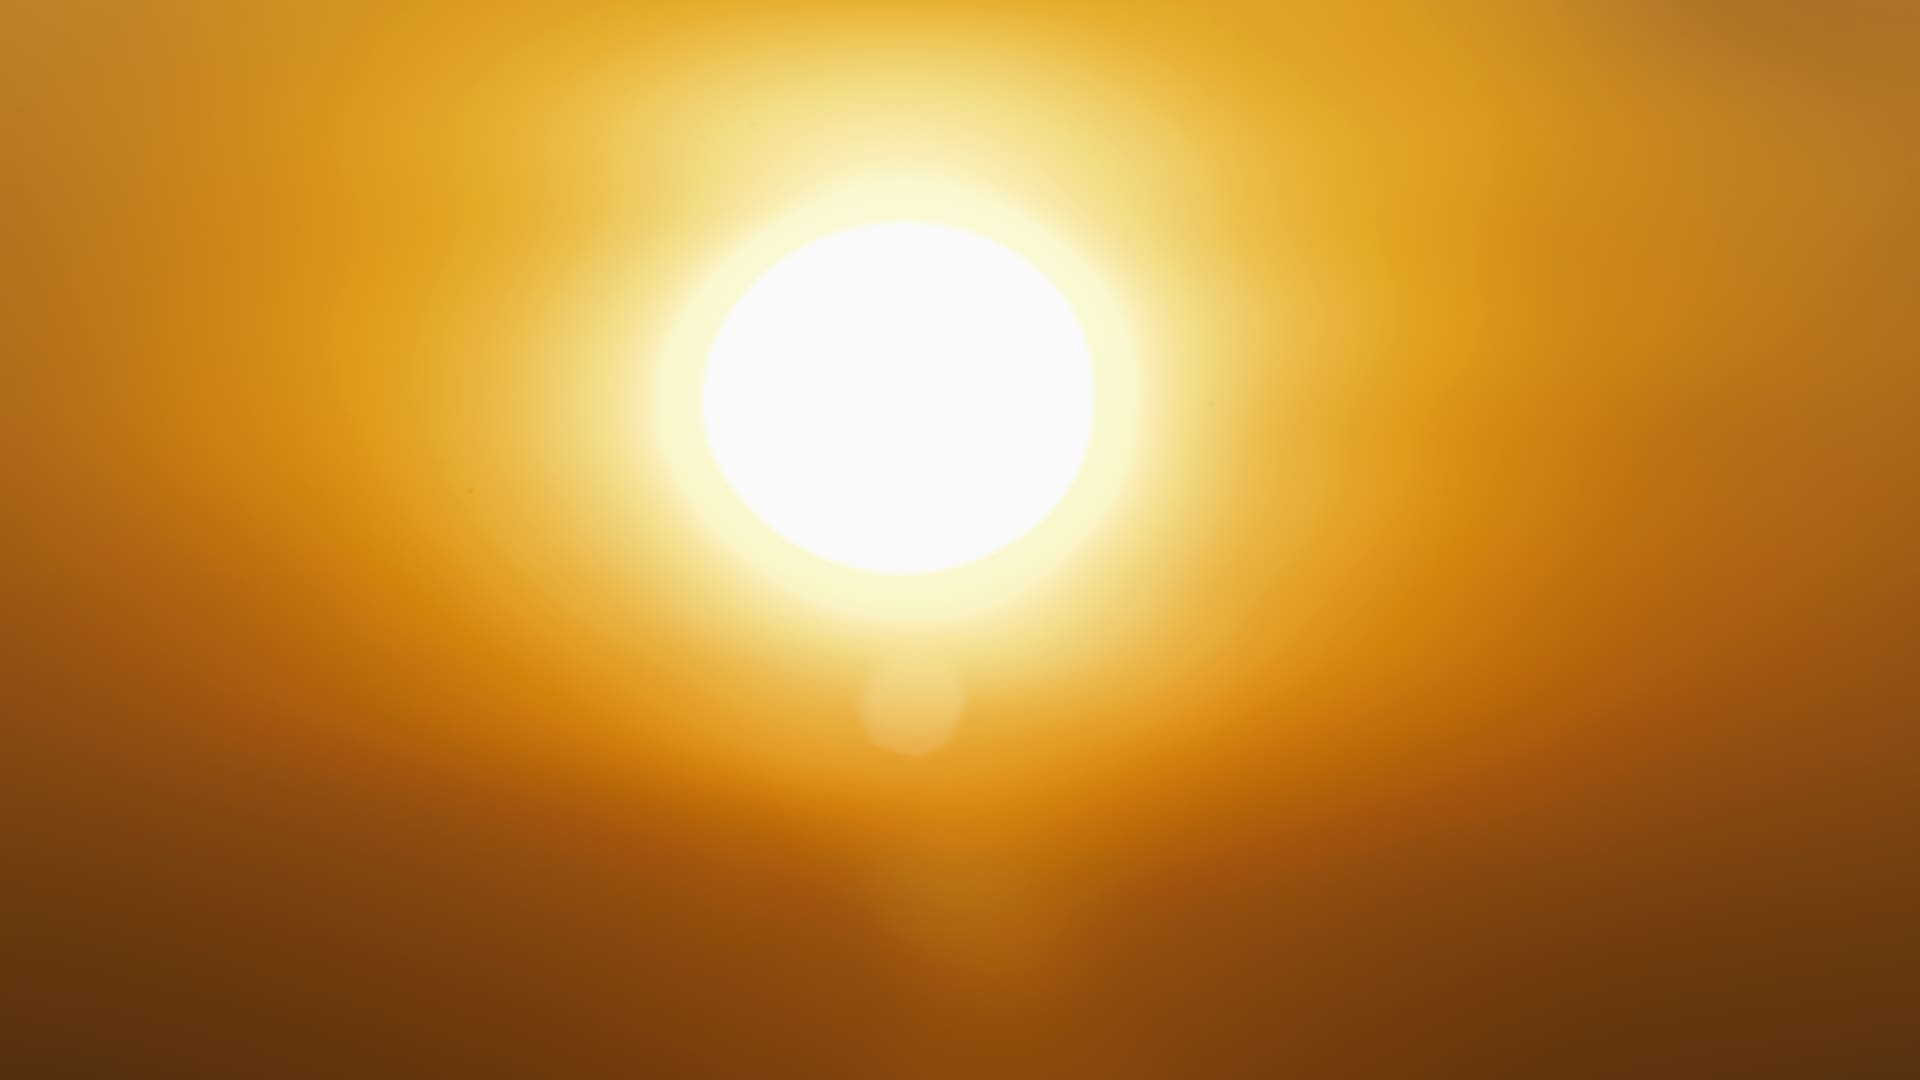 White House is pushing ahead research to cool Earth by reflecting back sunlight